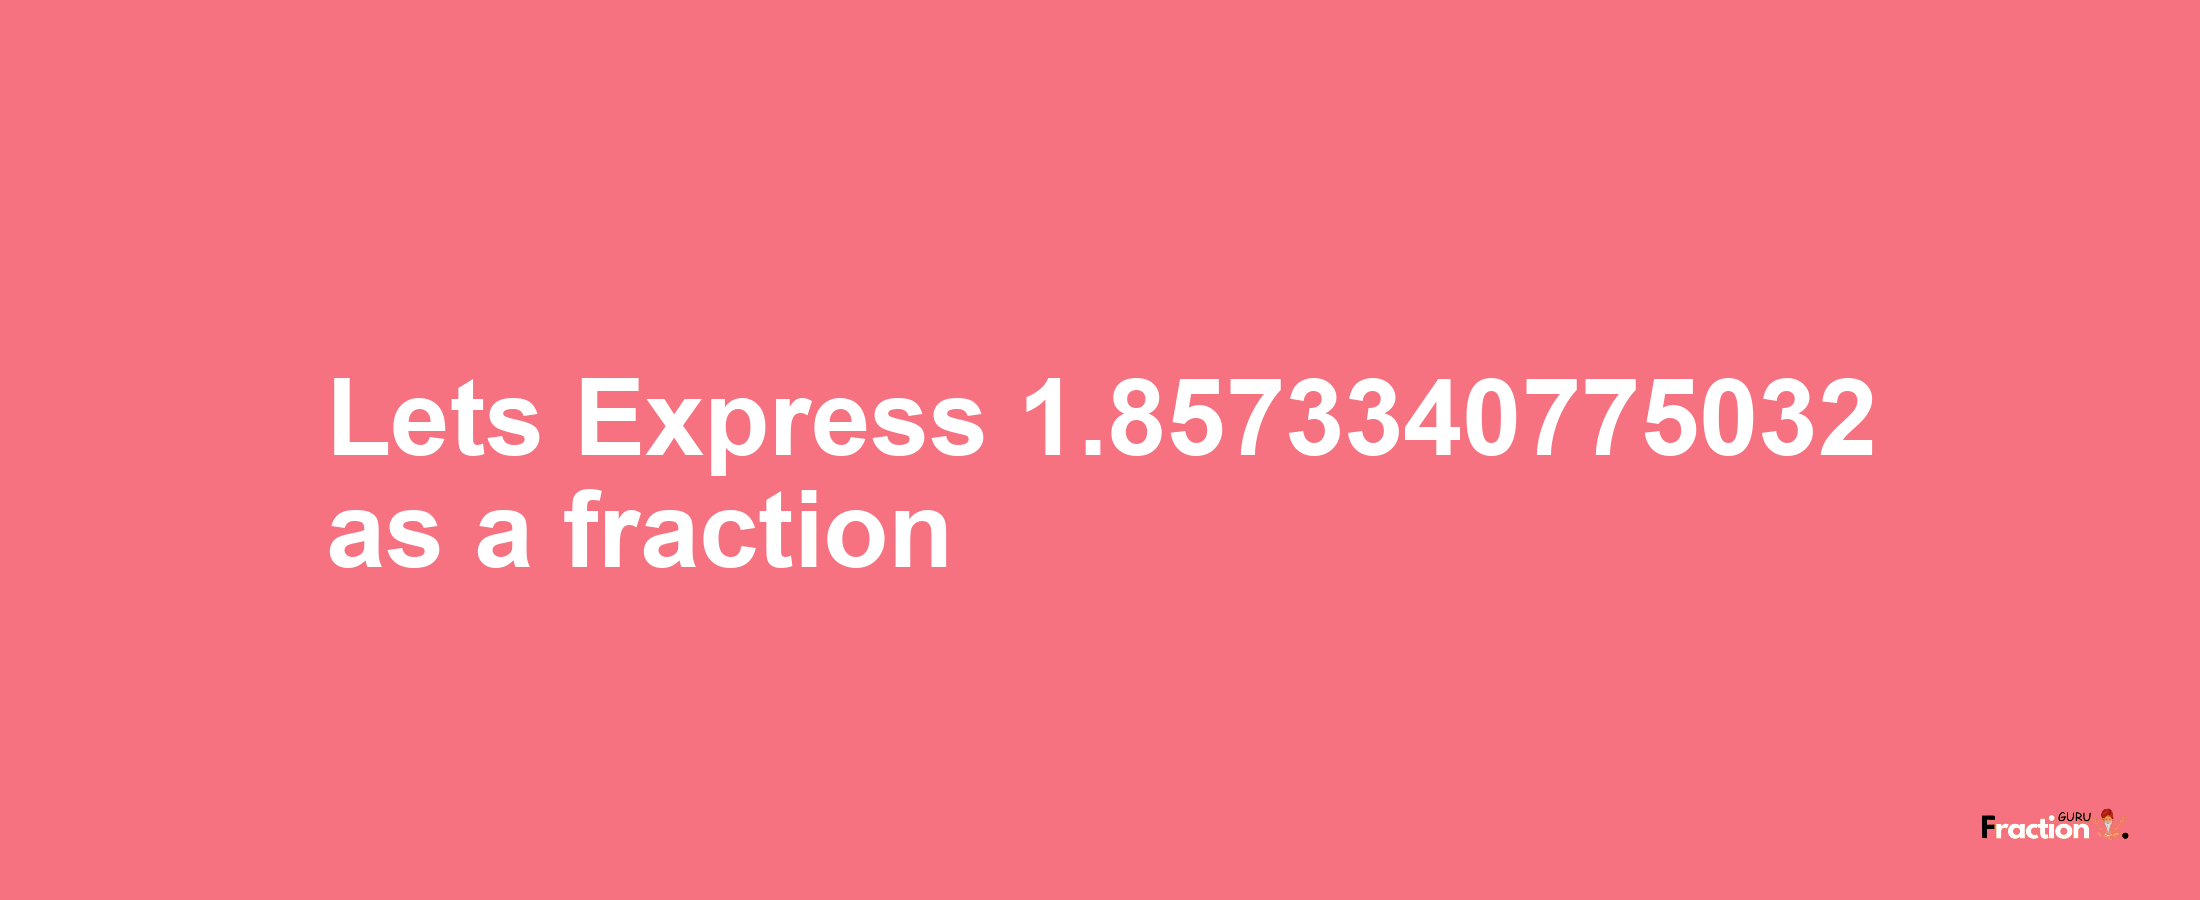 Lets Express 1.8573340775032 as afraction